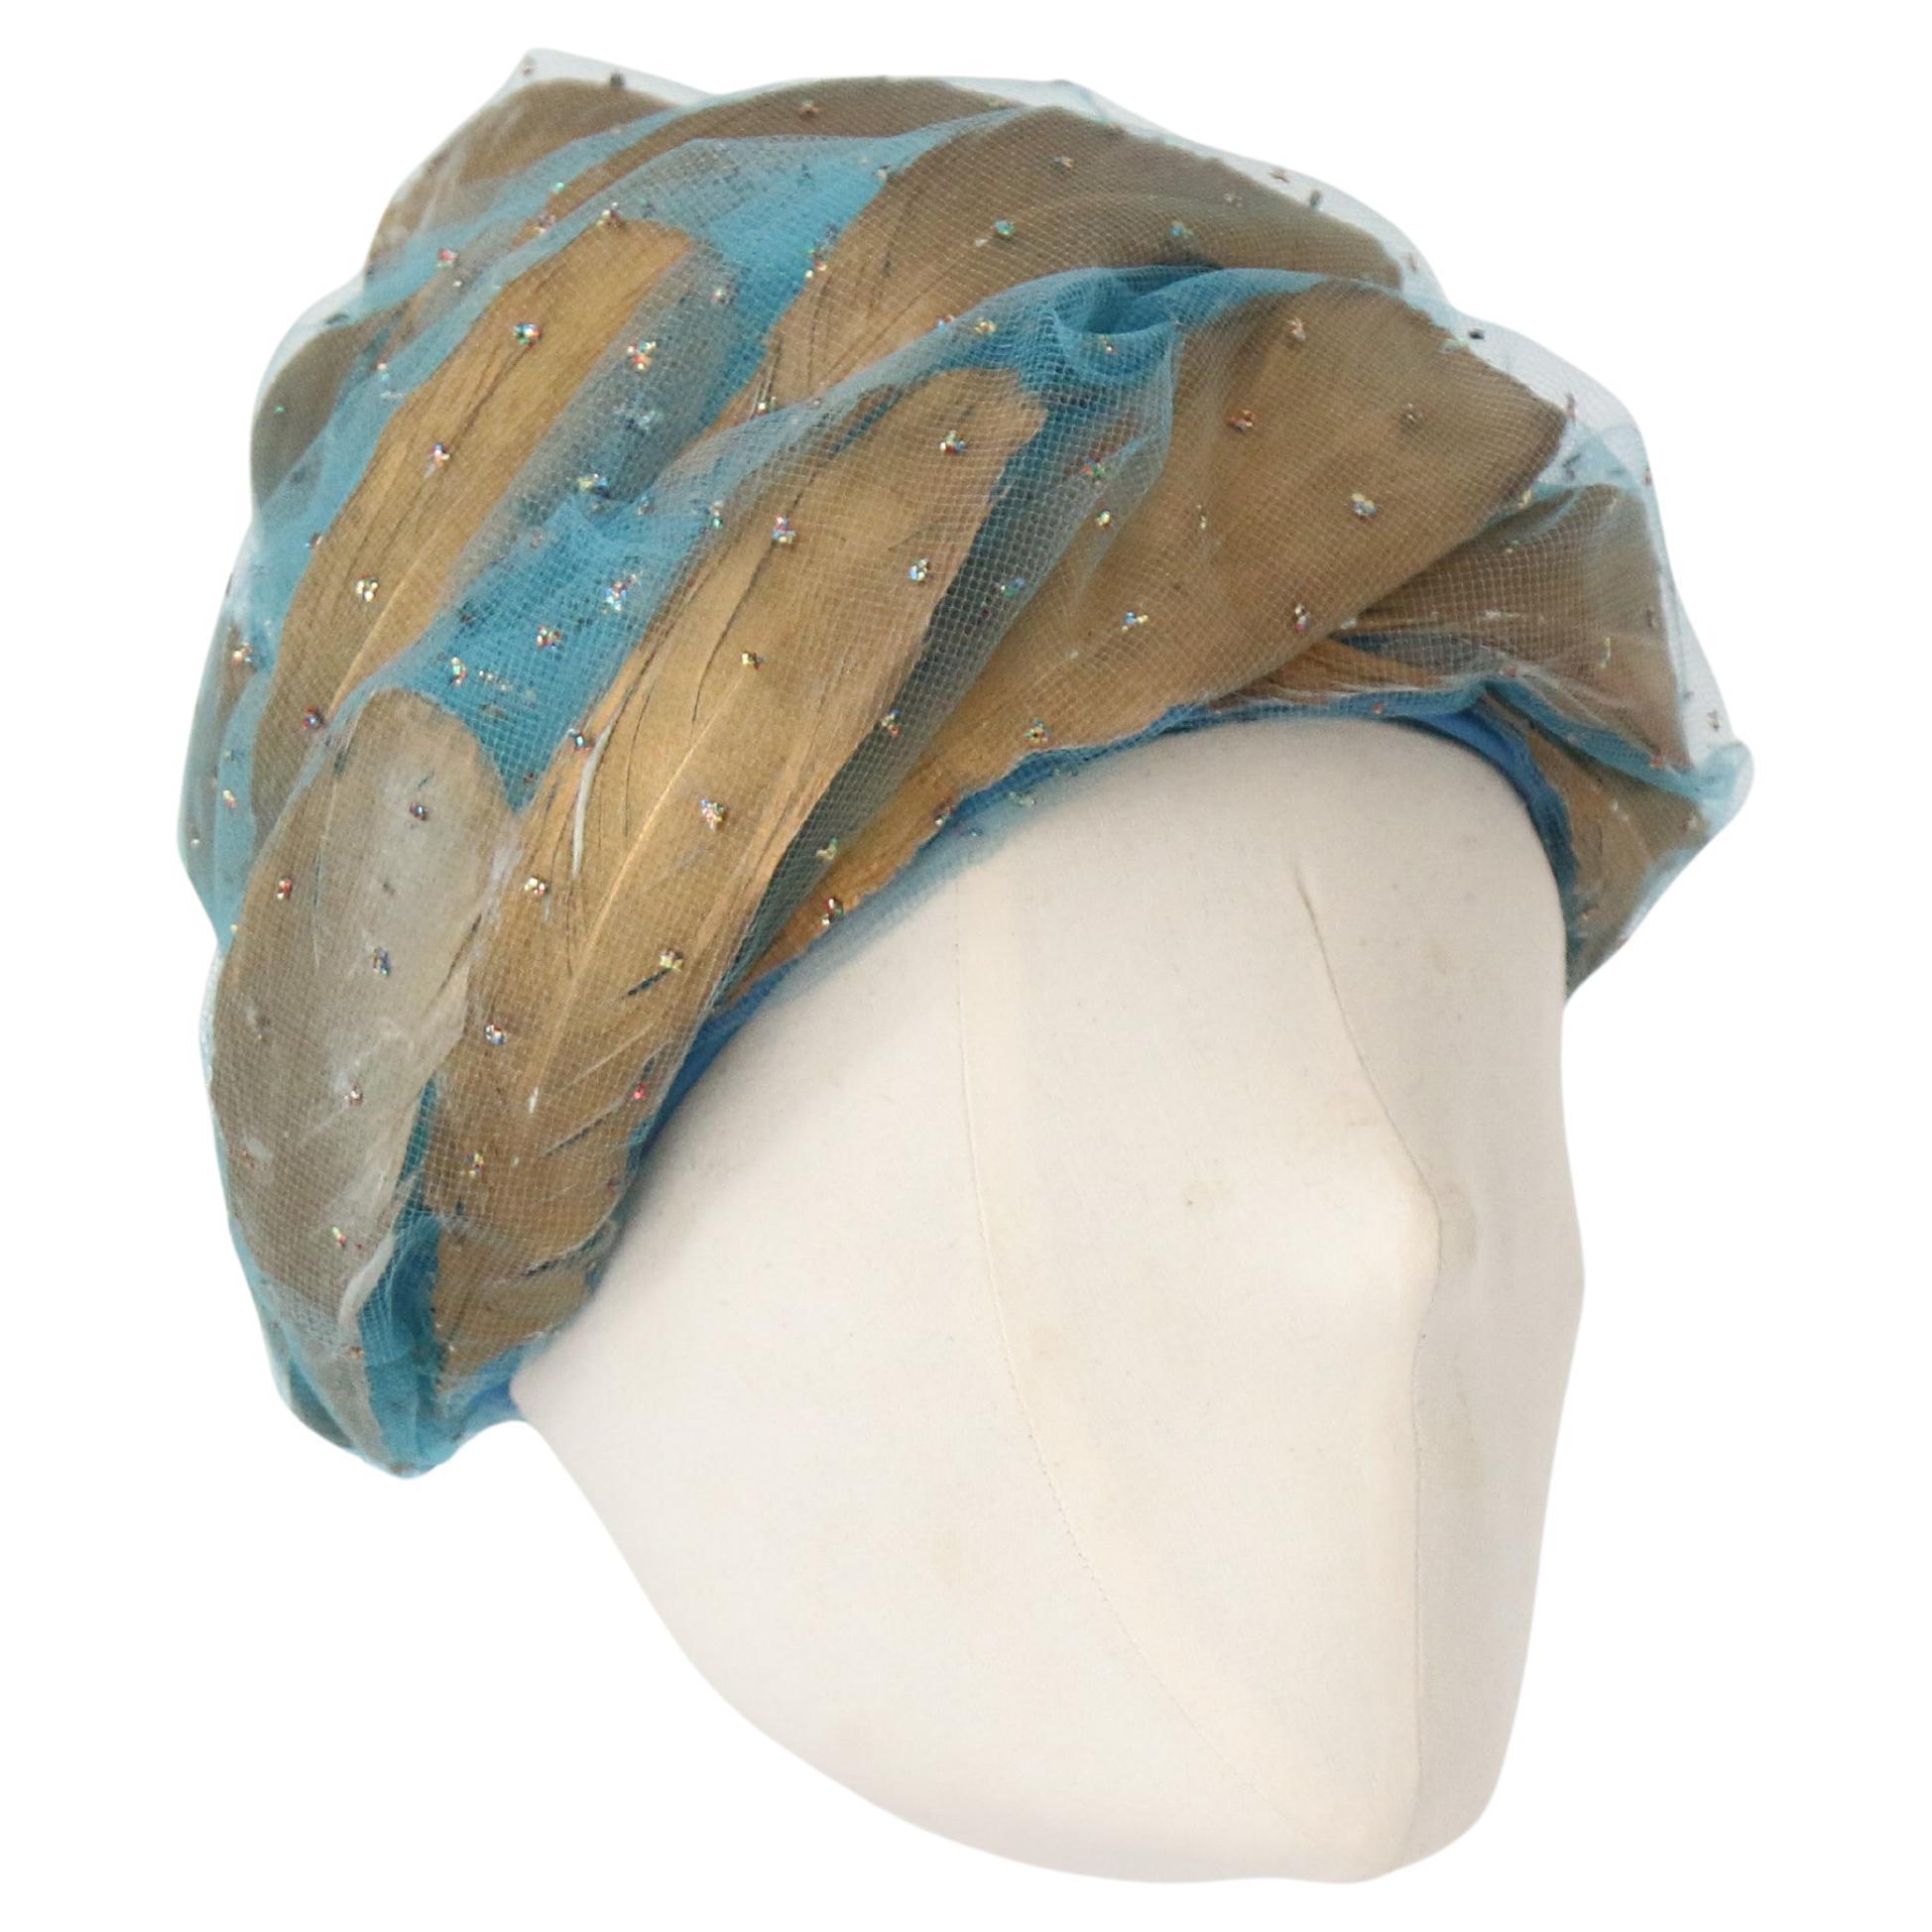 Vintage 1960's Christiain Dior Turquoise Tulle & Gold Turban Hat For Sale